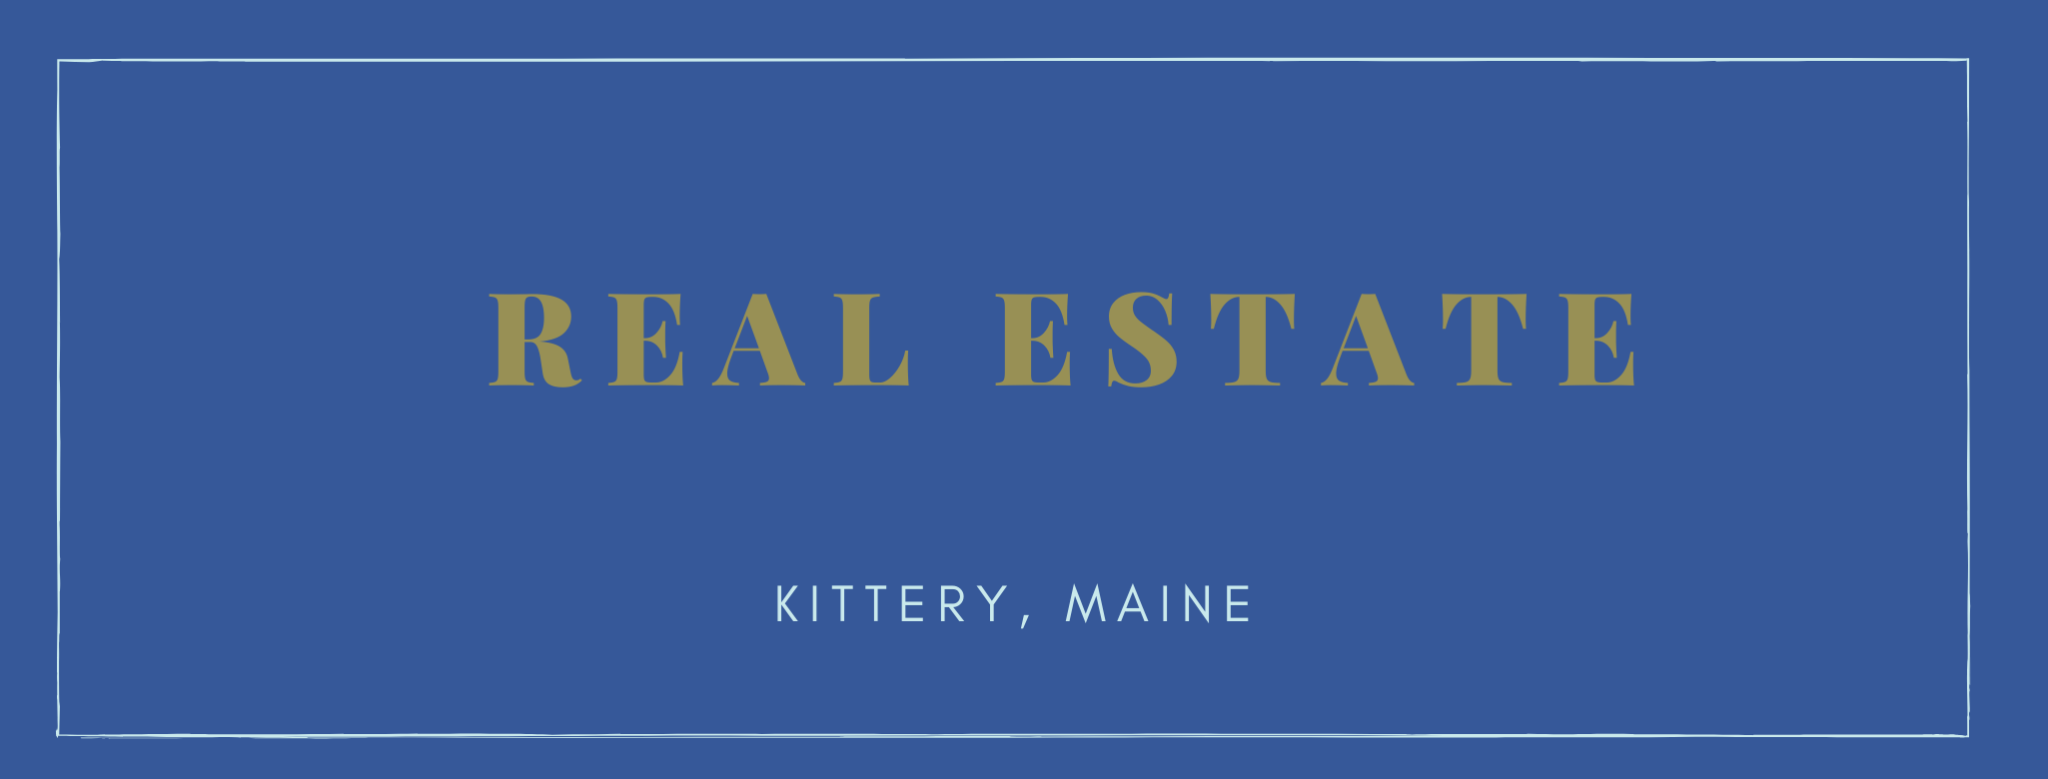 WHAT TO DO IN KITTERY, MAINE SEACOAST LATELY